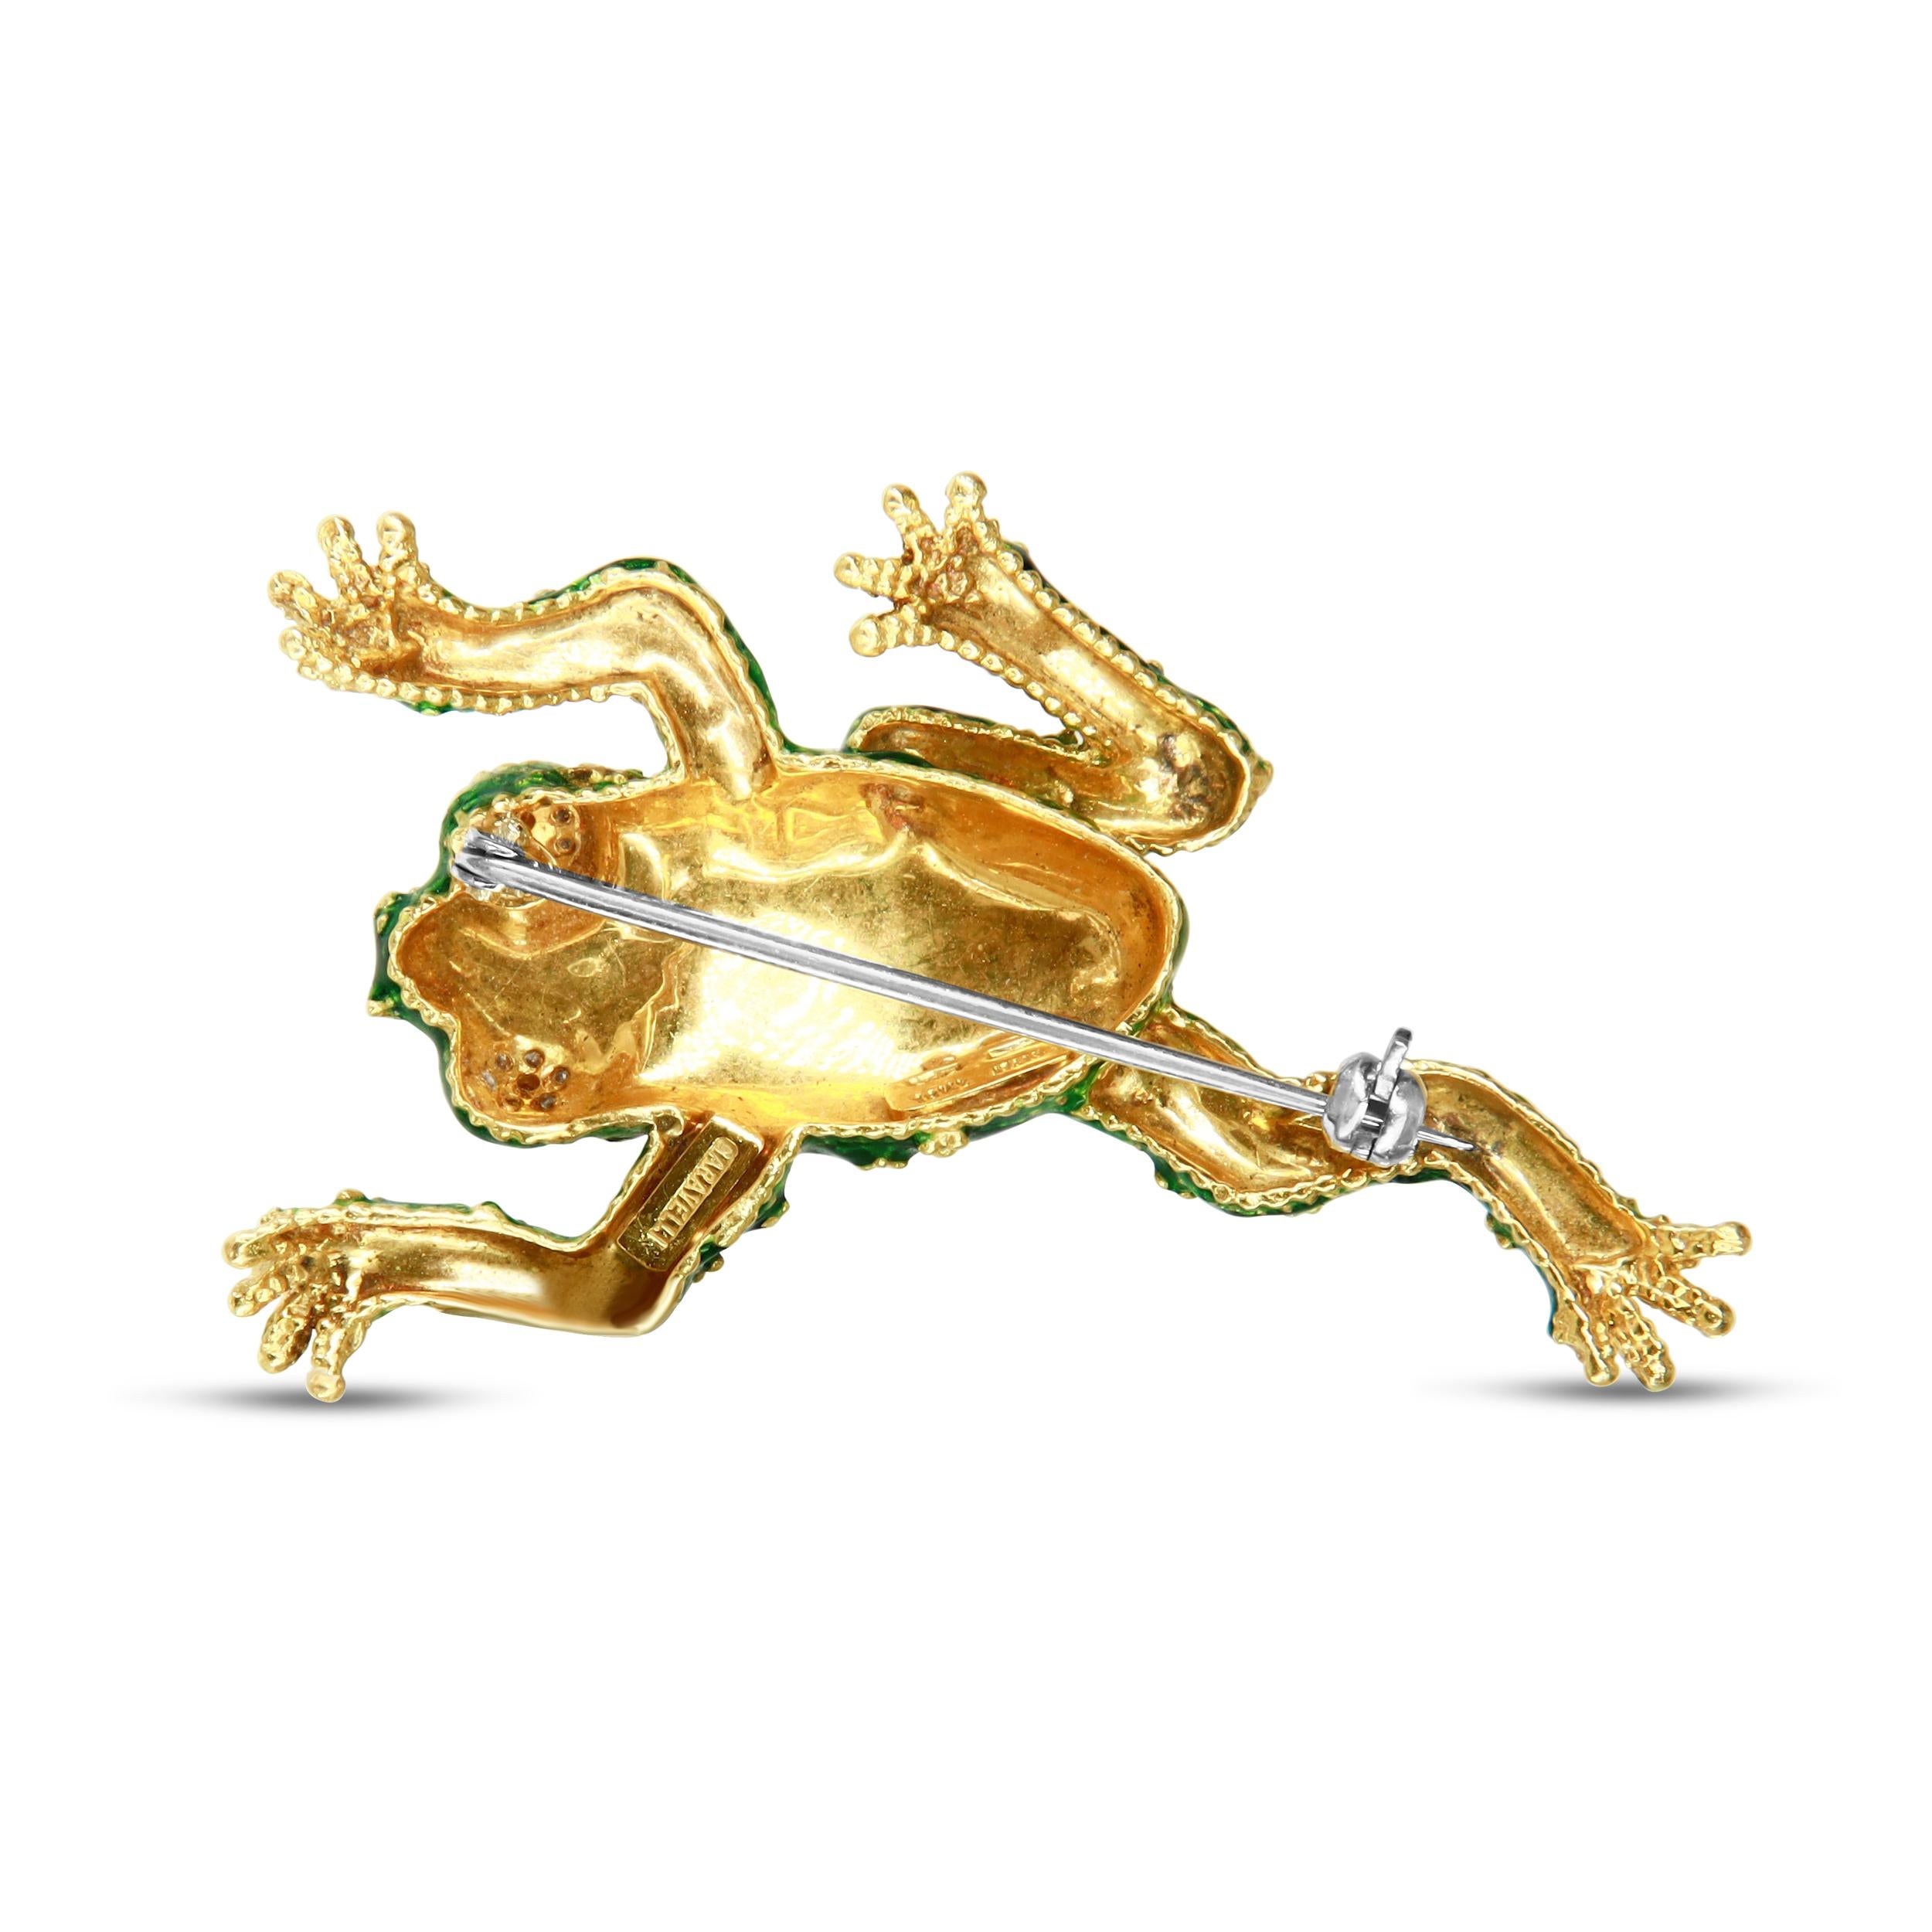 Delicate details imbue this enchanting brooch with a lifelike quality, perfect for the animal lover of those who seek to invite success into their lives. As a symbol of prosperity, the frog is a good luck charm. Not just lucky, this little amphibian